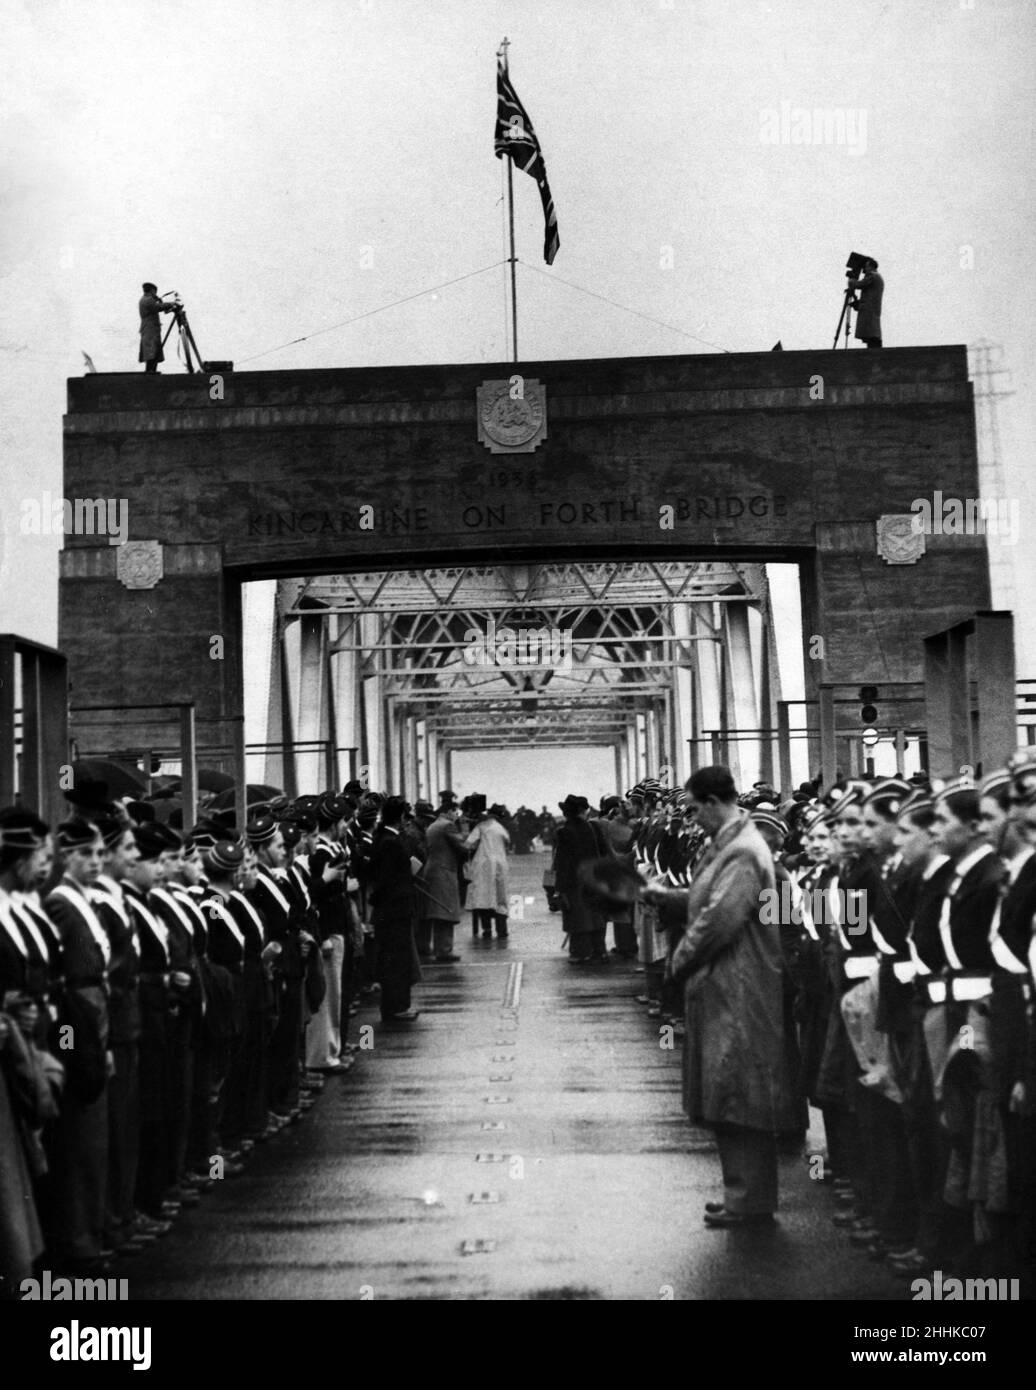 Opening of Kincardine on Forth Bridge by the governors of the counties of Fife, Stirling and Clackmannanshire. 30th October 1936. Stock Photo